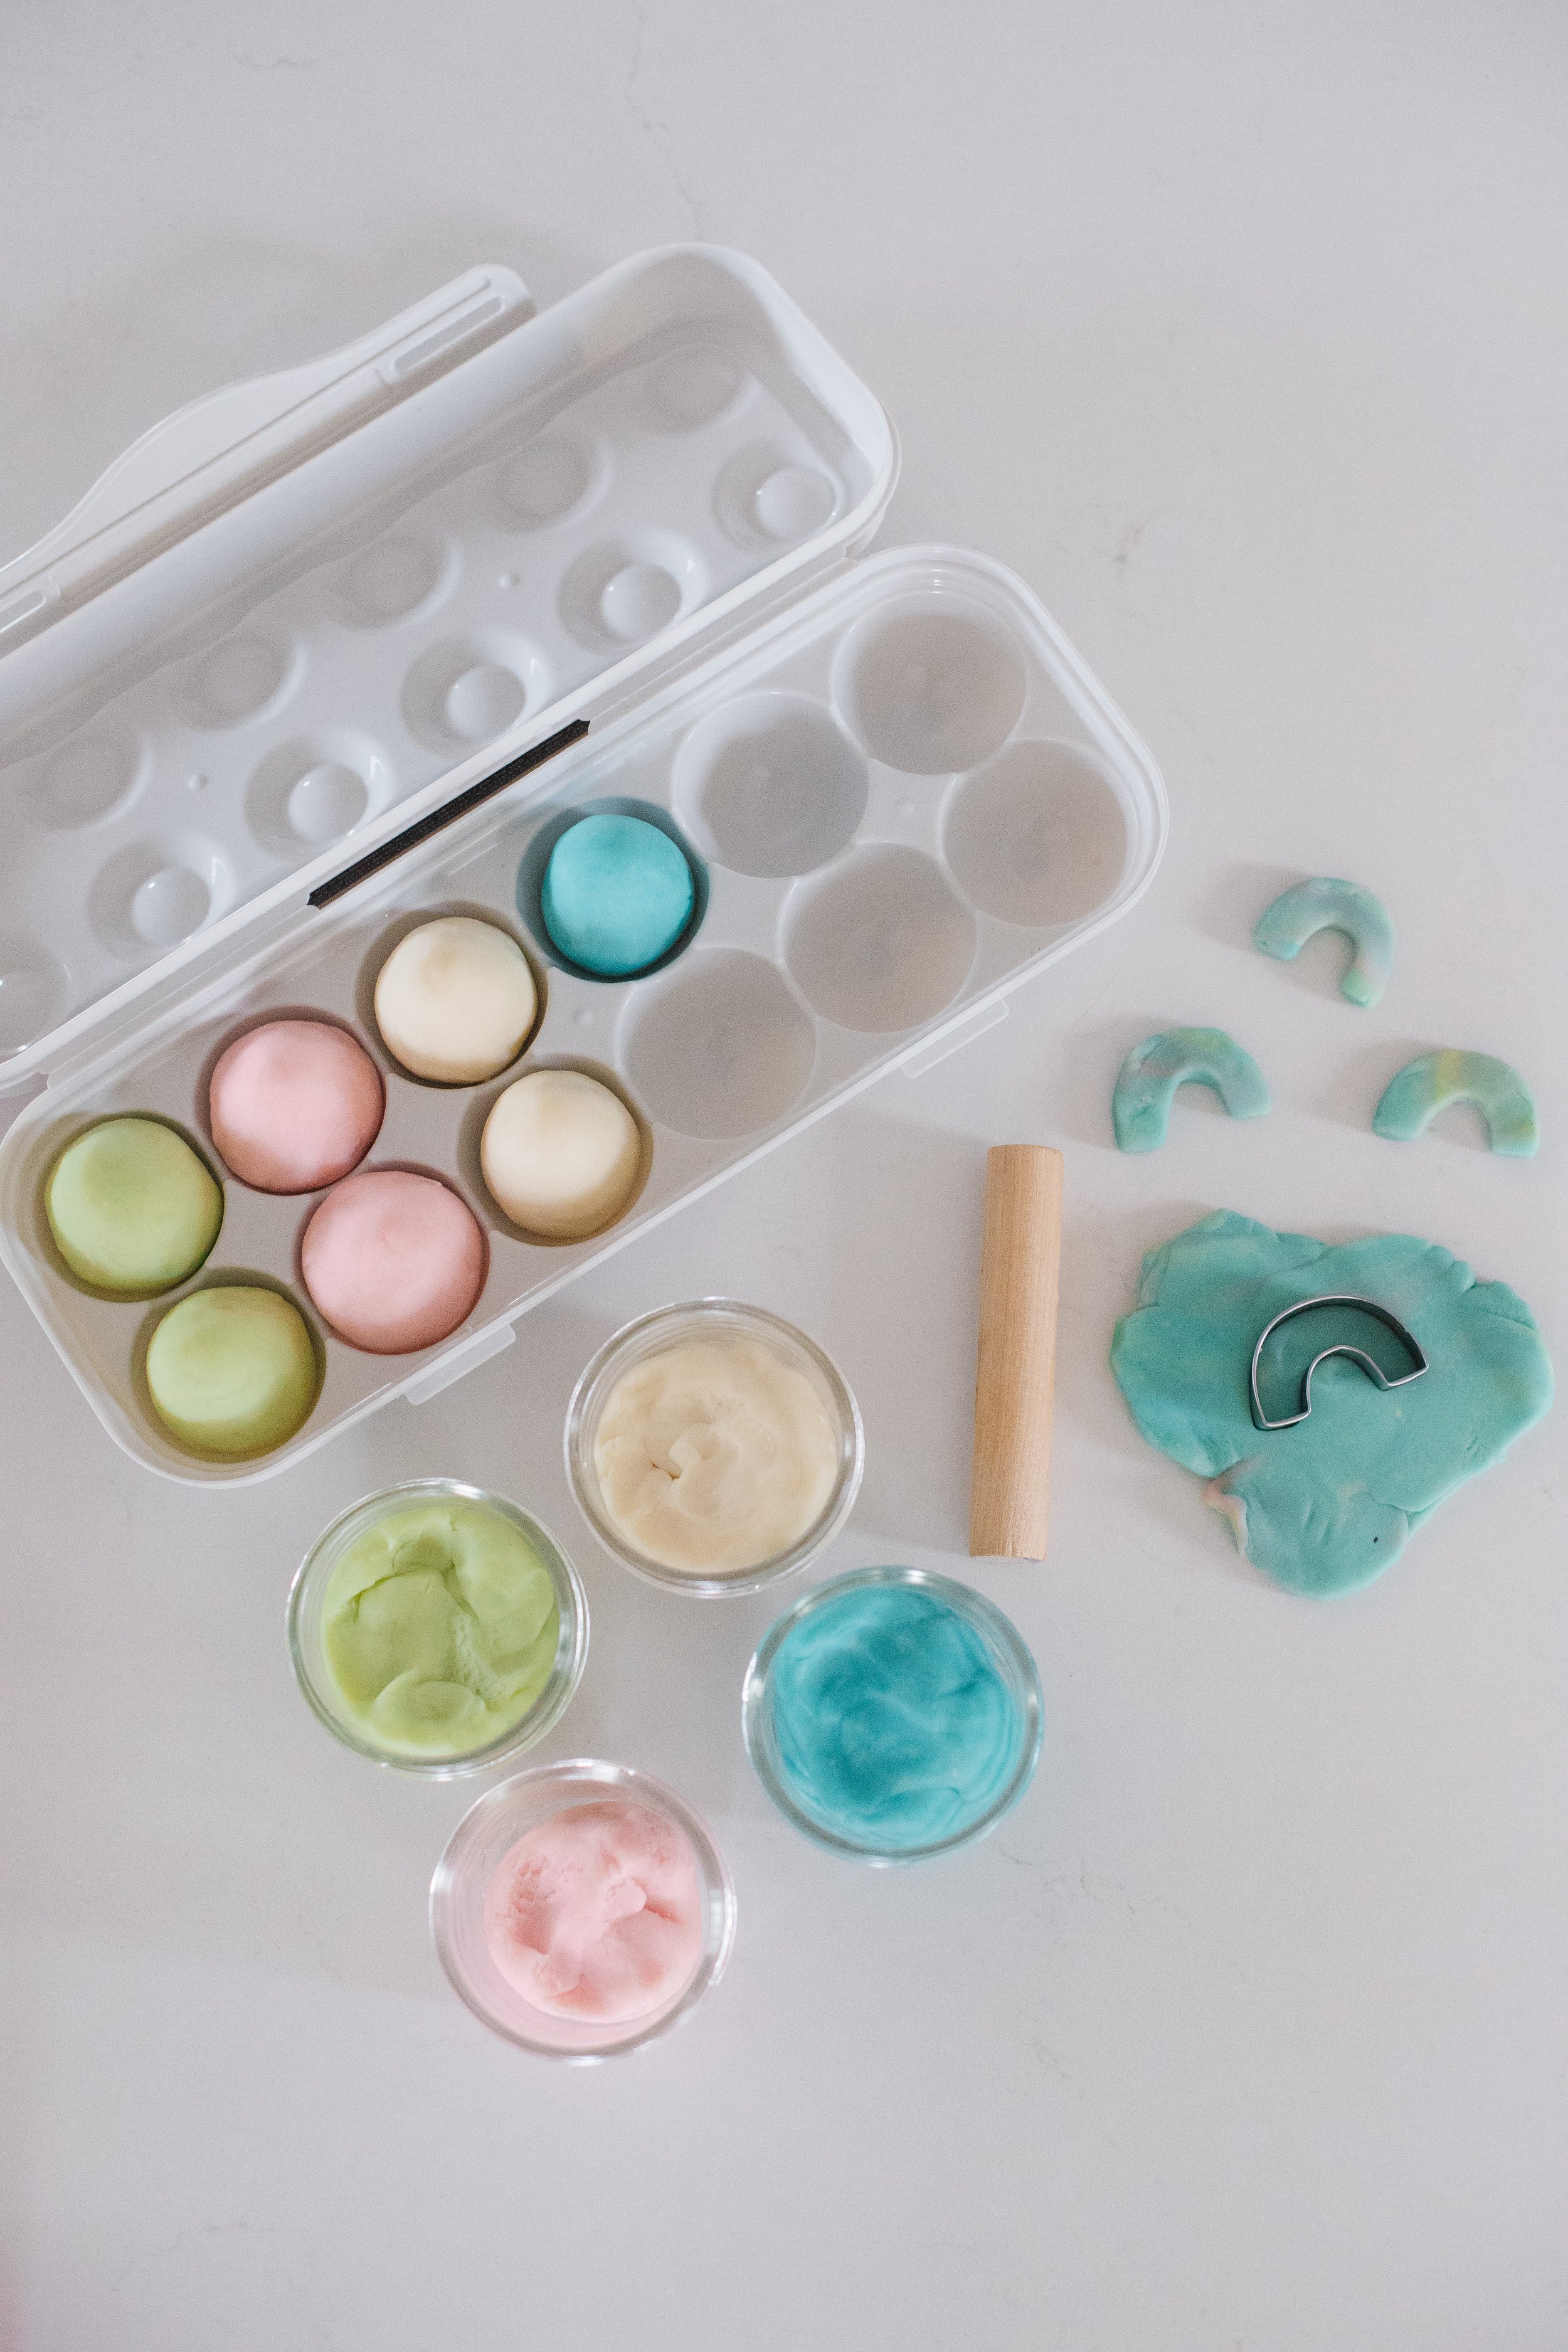 How To Make Non-Toxic Playdough For Your Baby? 